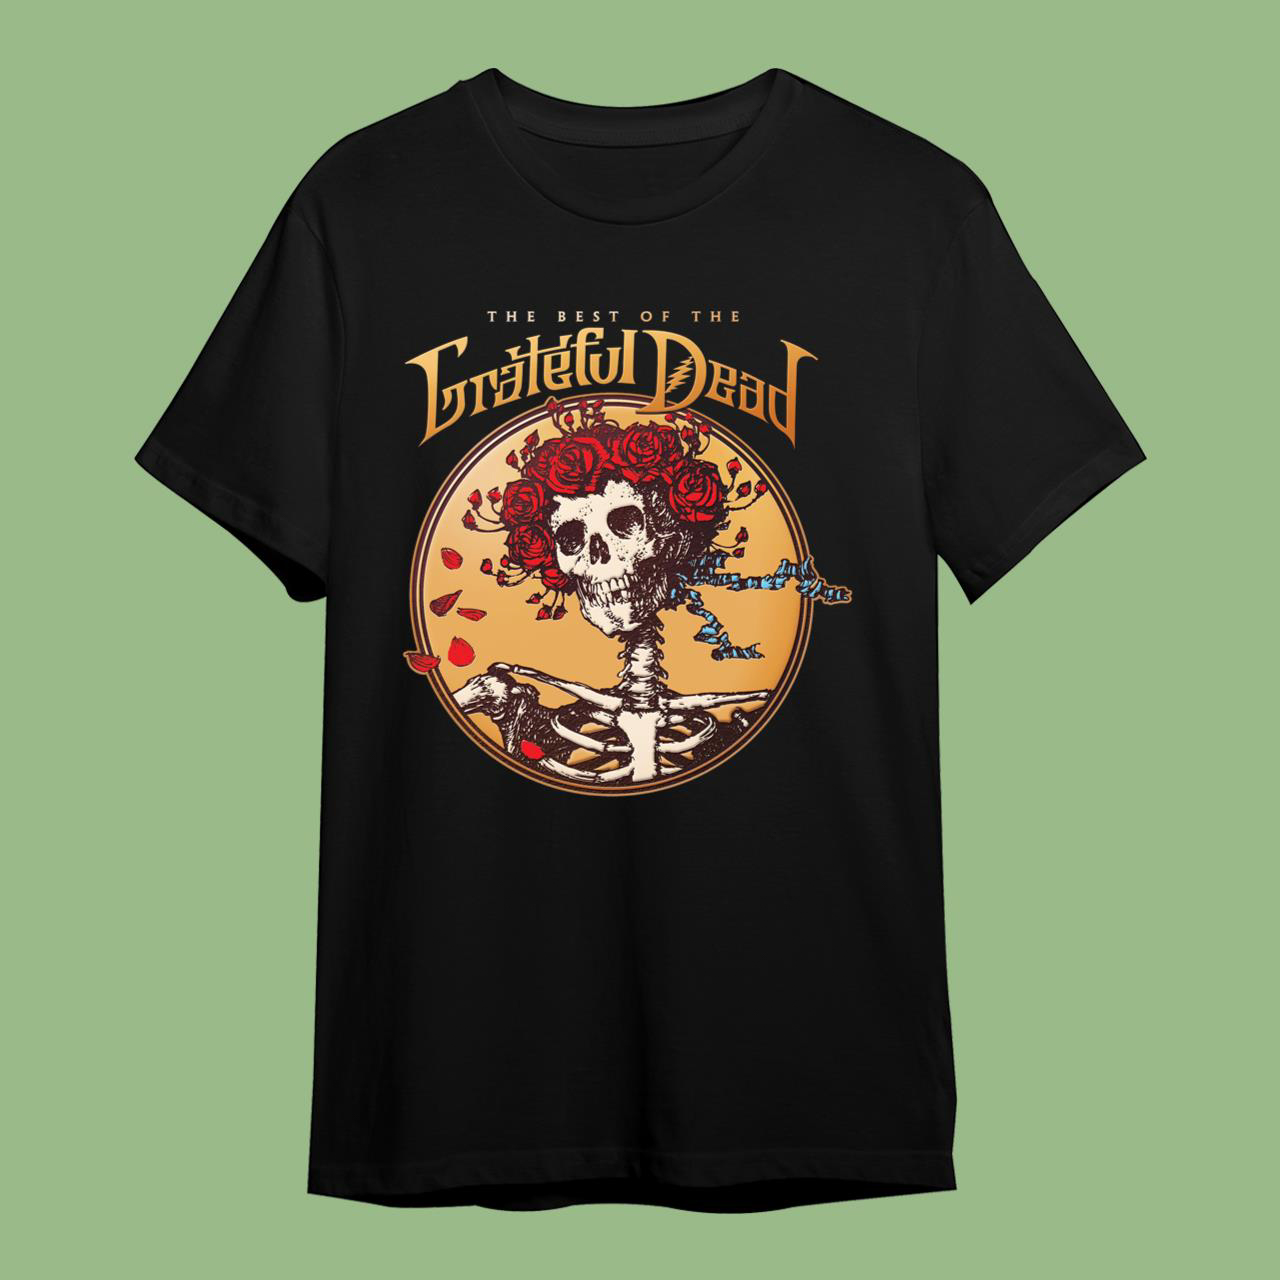 The Best Of The Greatful Dead T-Shirt